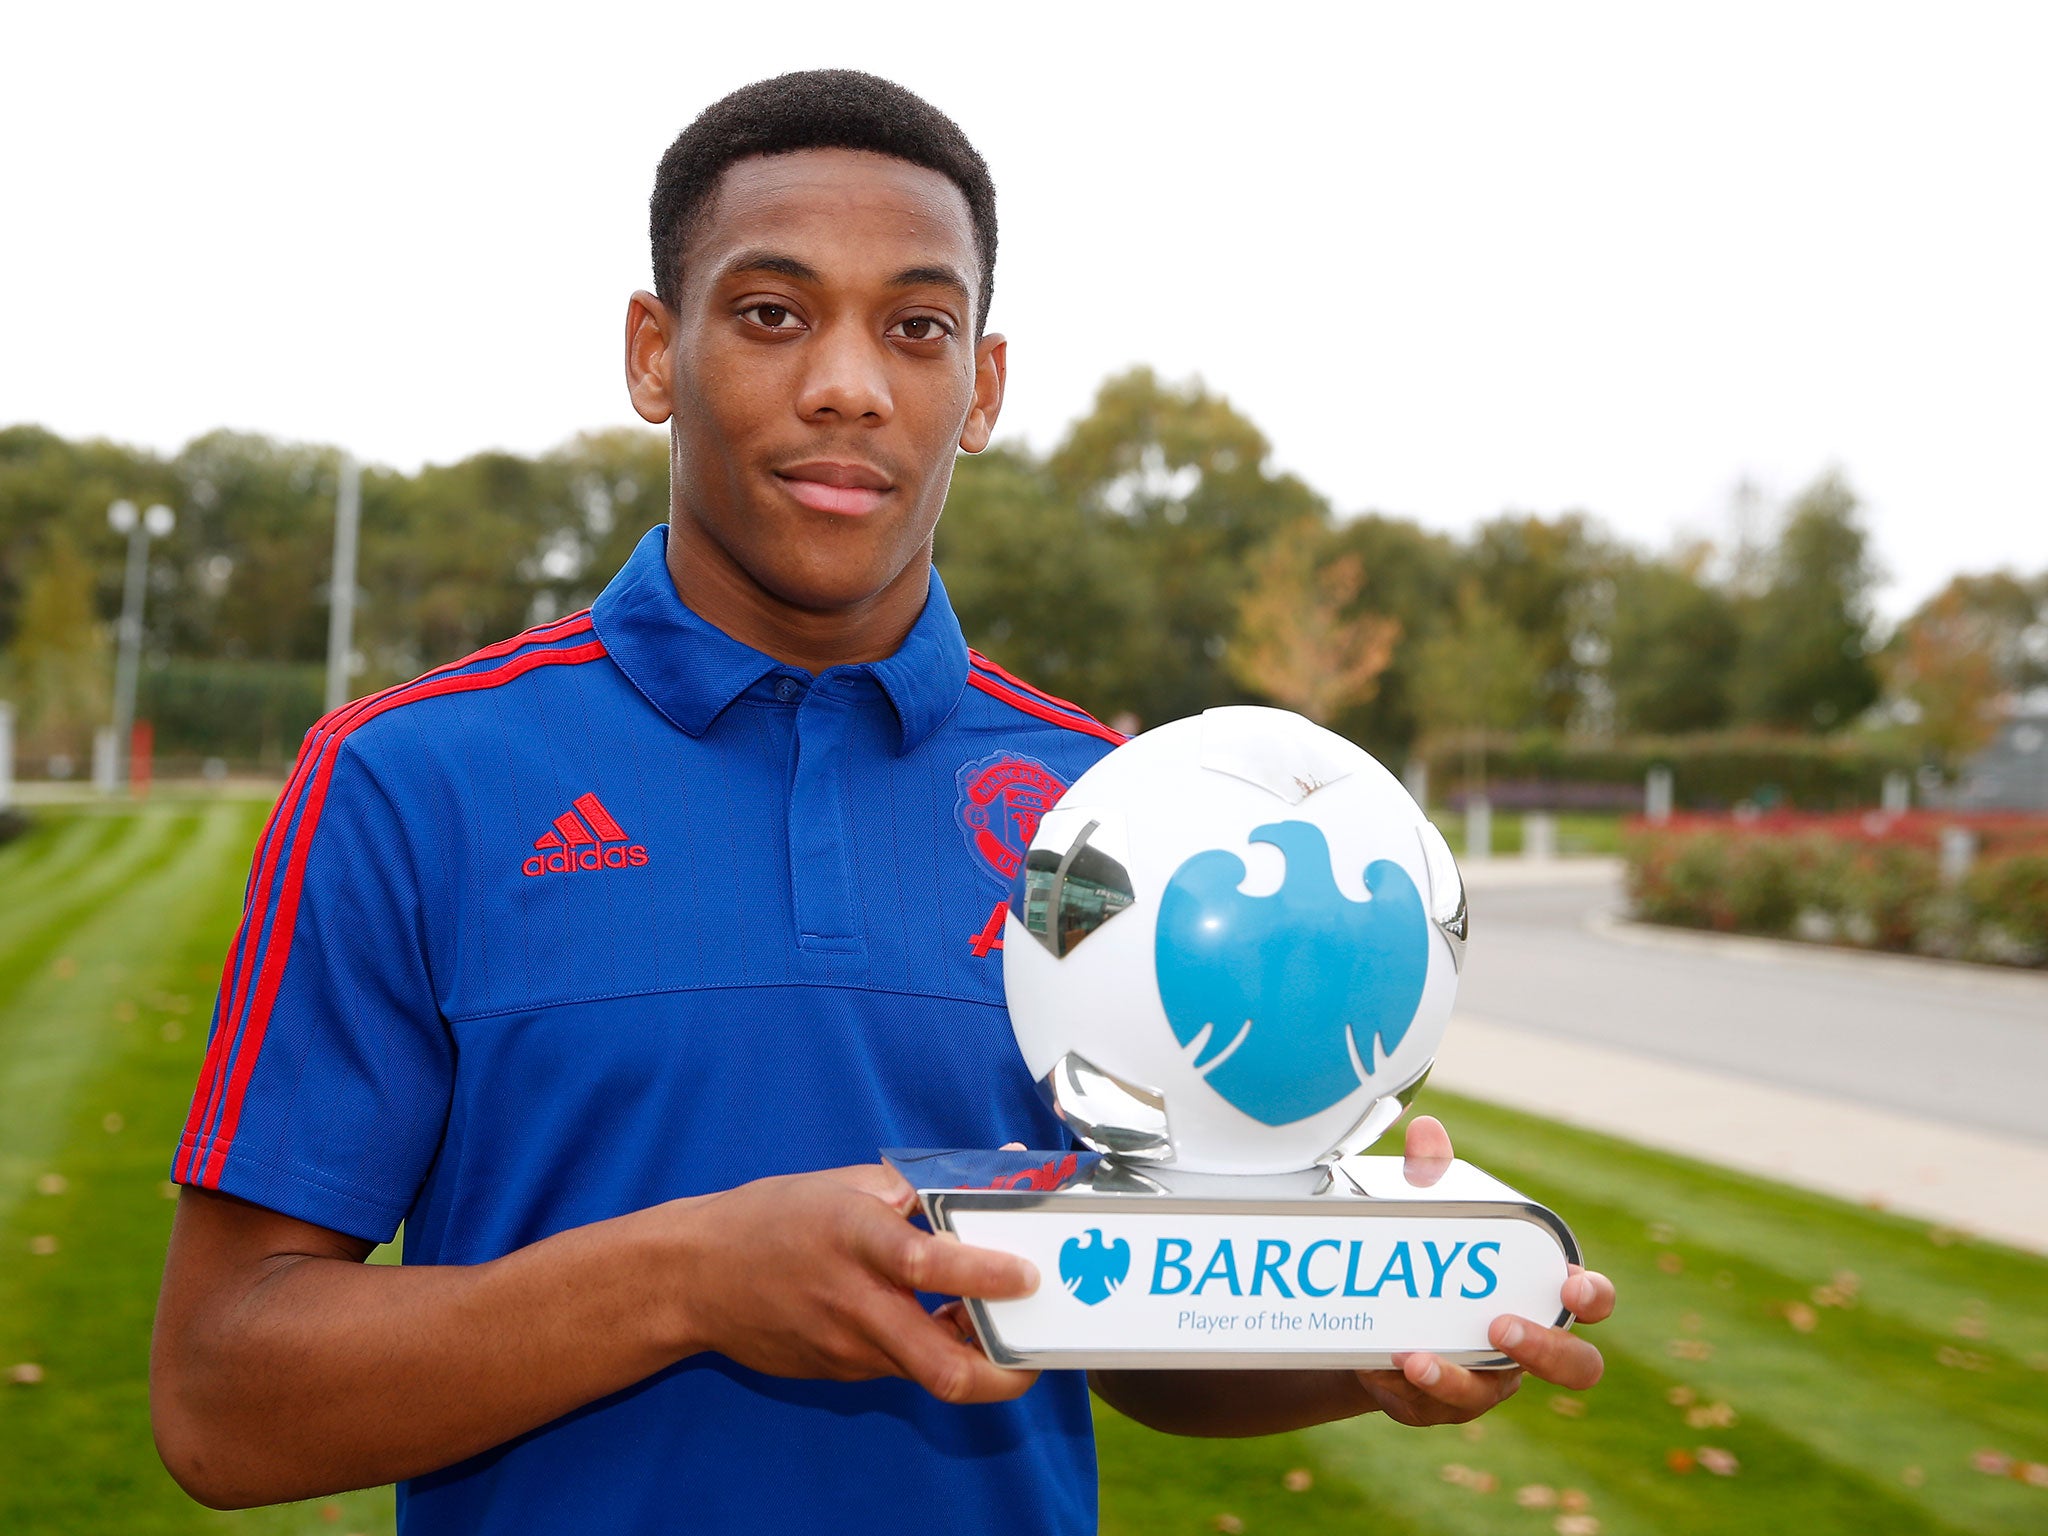 Anthony Martial wins Premier League Player of the Month award 43 days